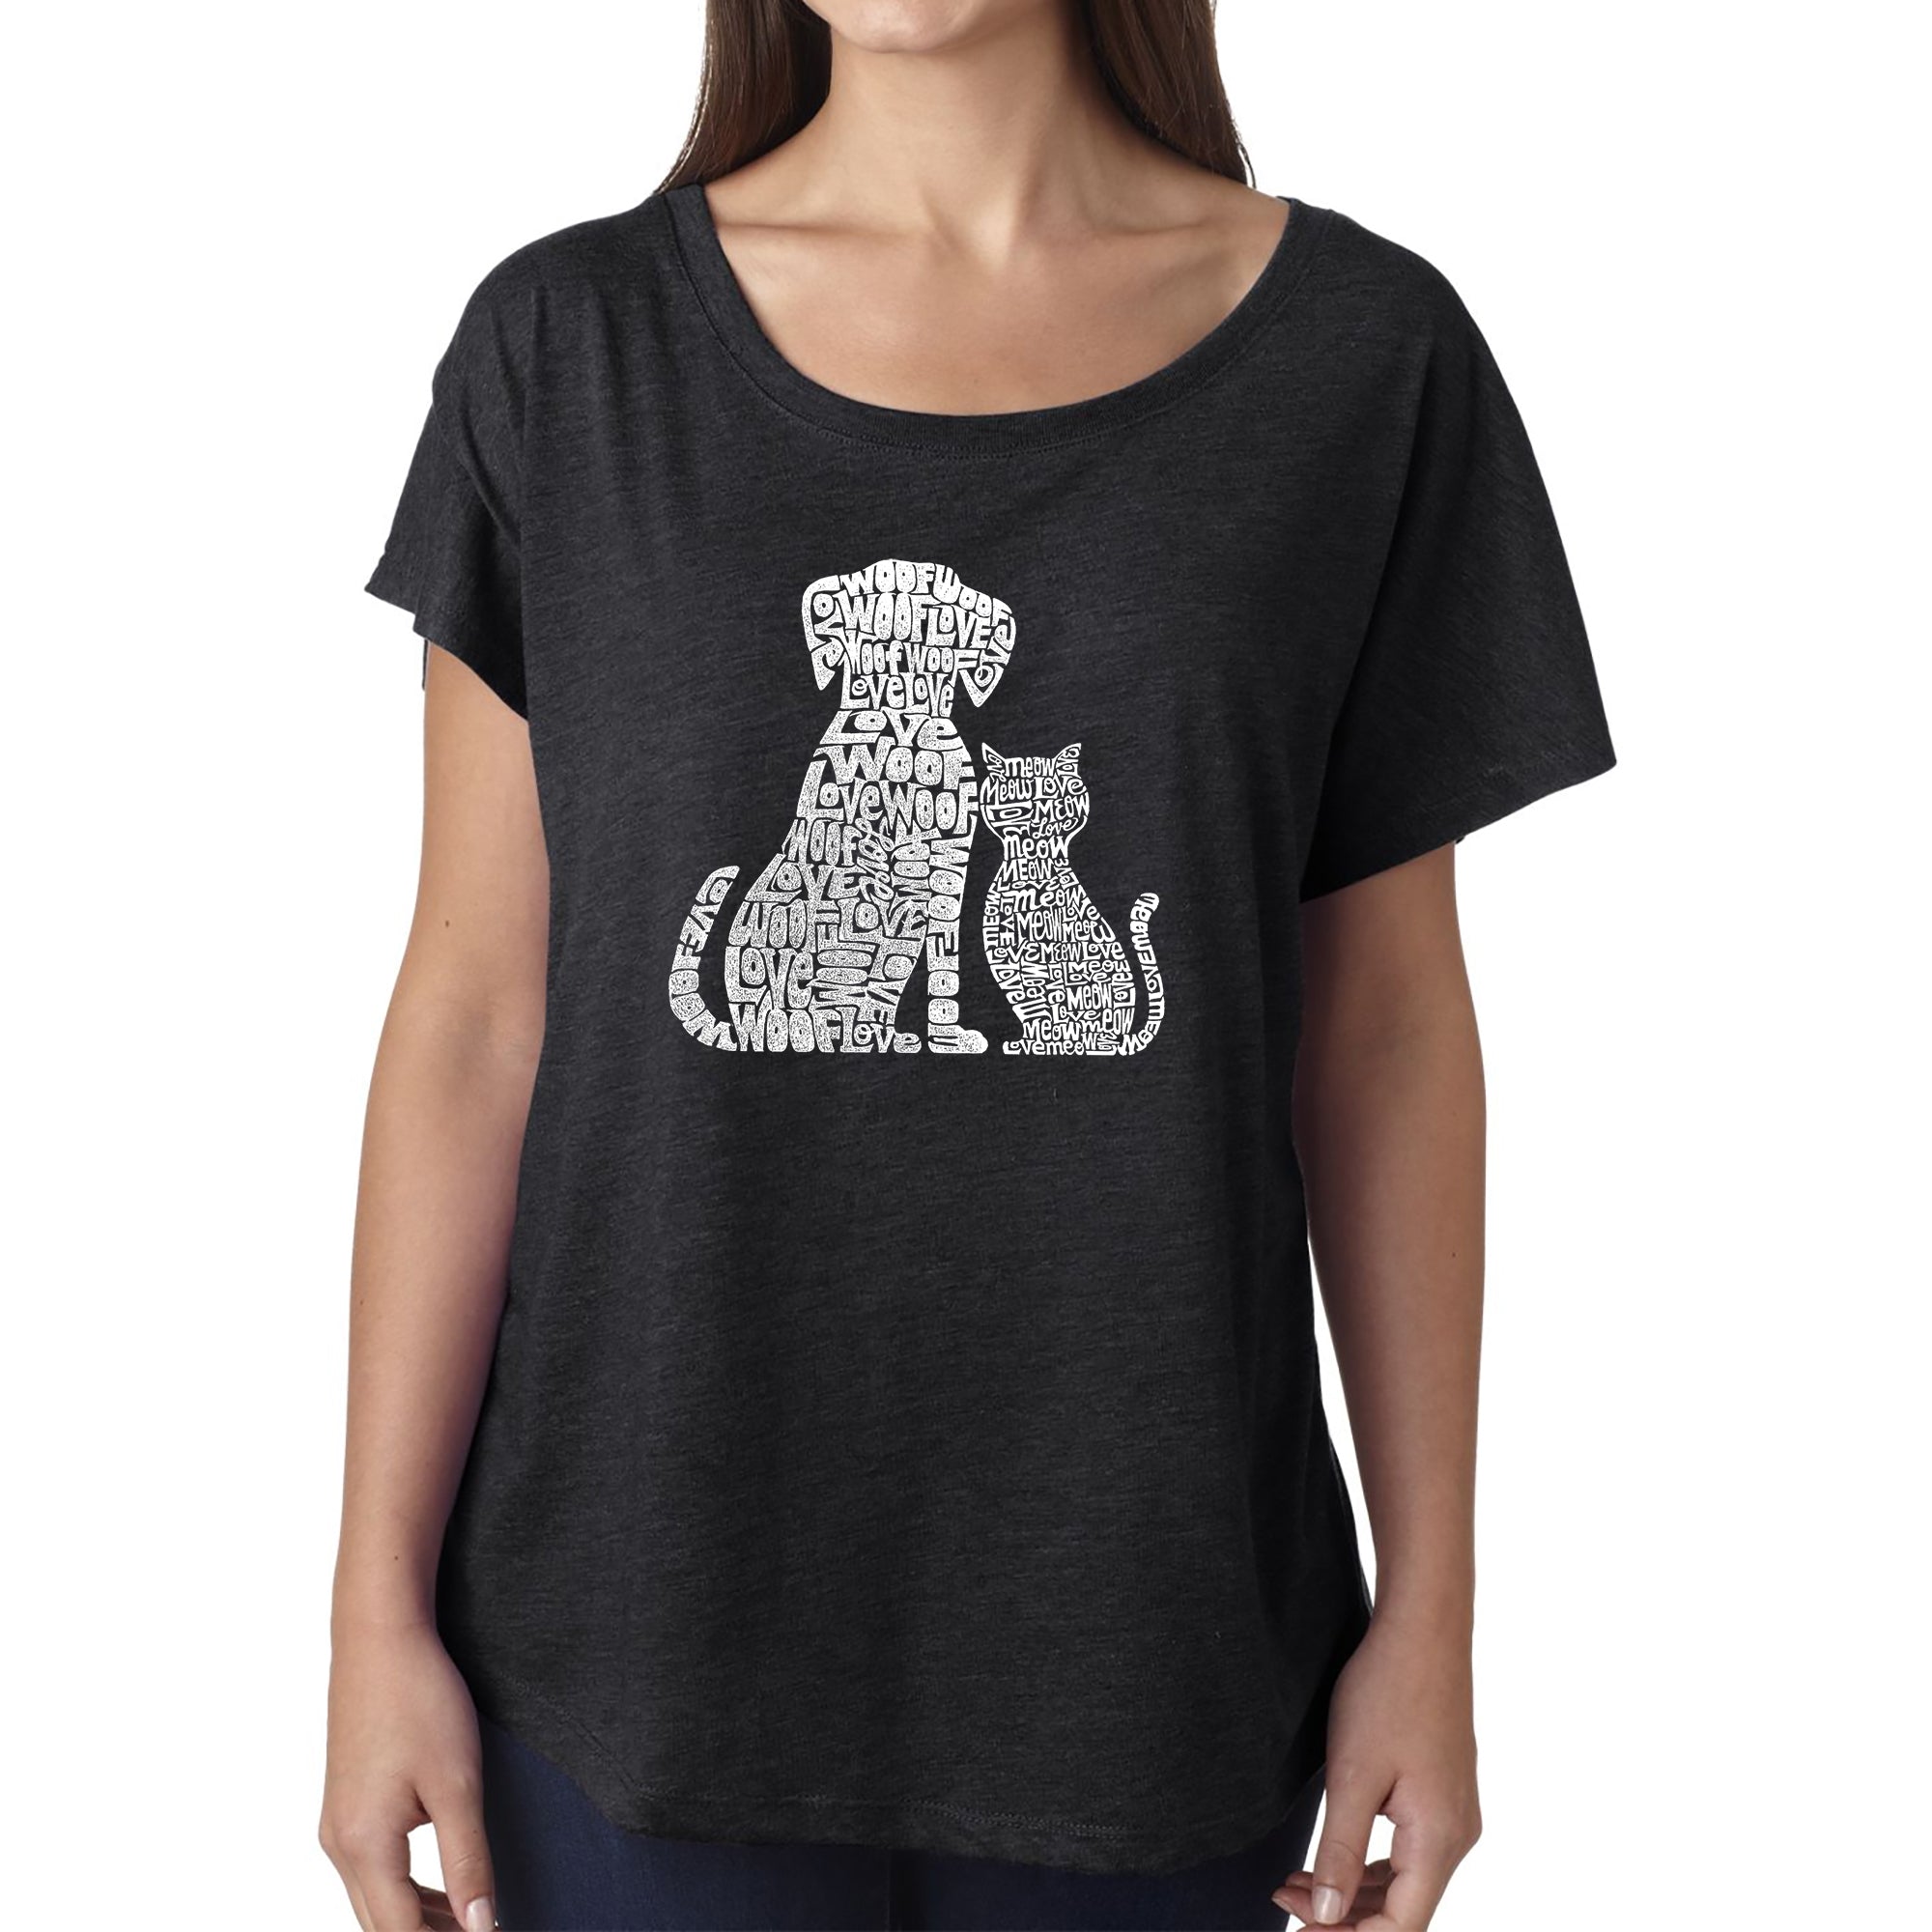 Dogs And Cats - Women's Loose Fit Dolman Cut Word Art Shirt - Navy - XX-Large